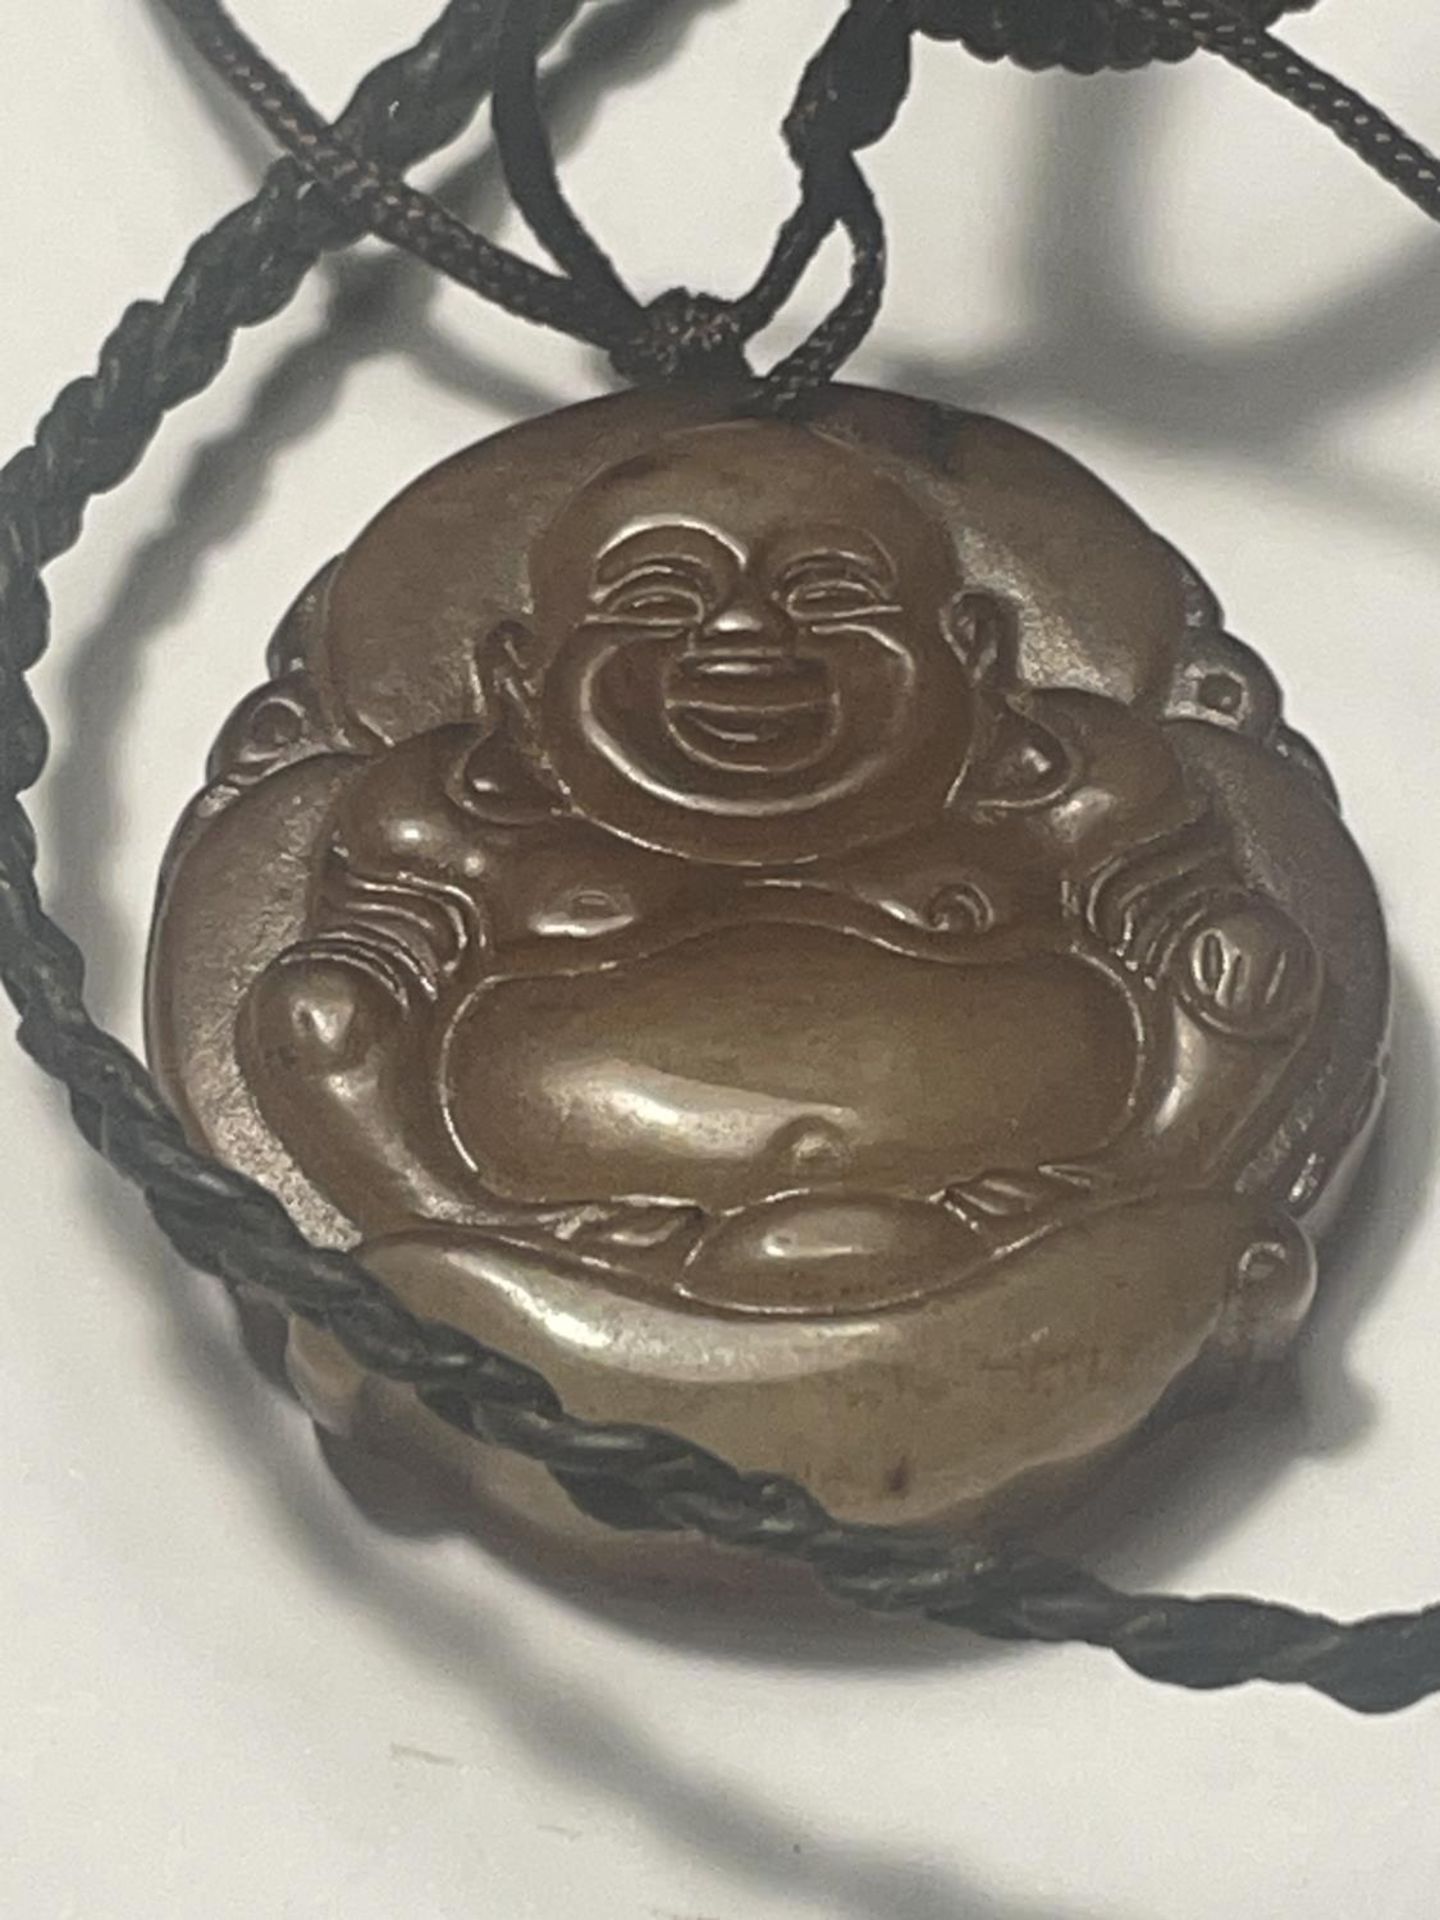 TWO NECKLACES TO INCLUDE A CARVED BUDDHA PENDANT AND A TALISMAN GOOD LUCK AMULET BOTH ON A LEATHER - Image 2 of 4